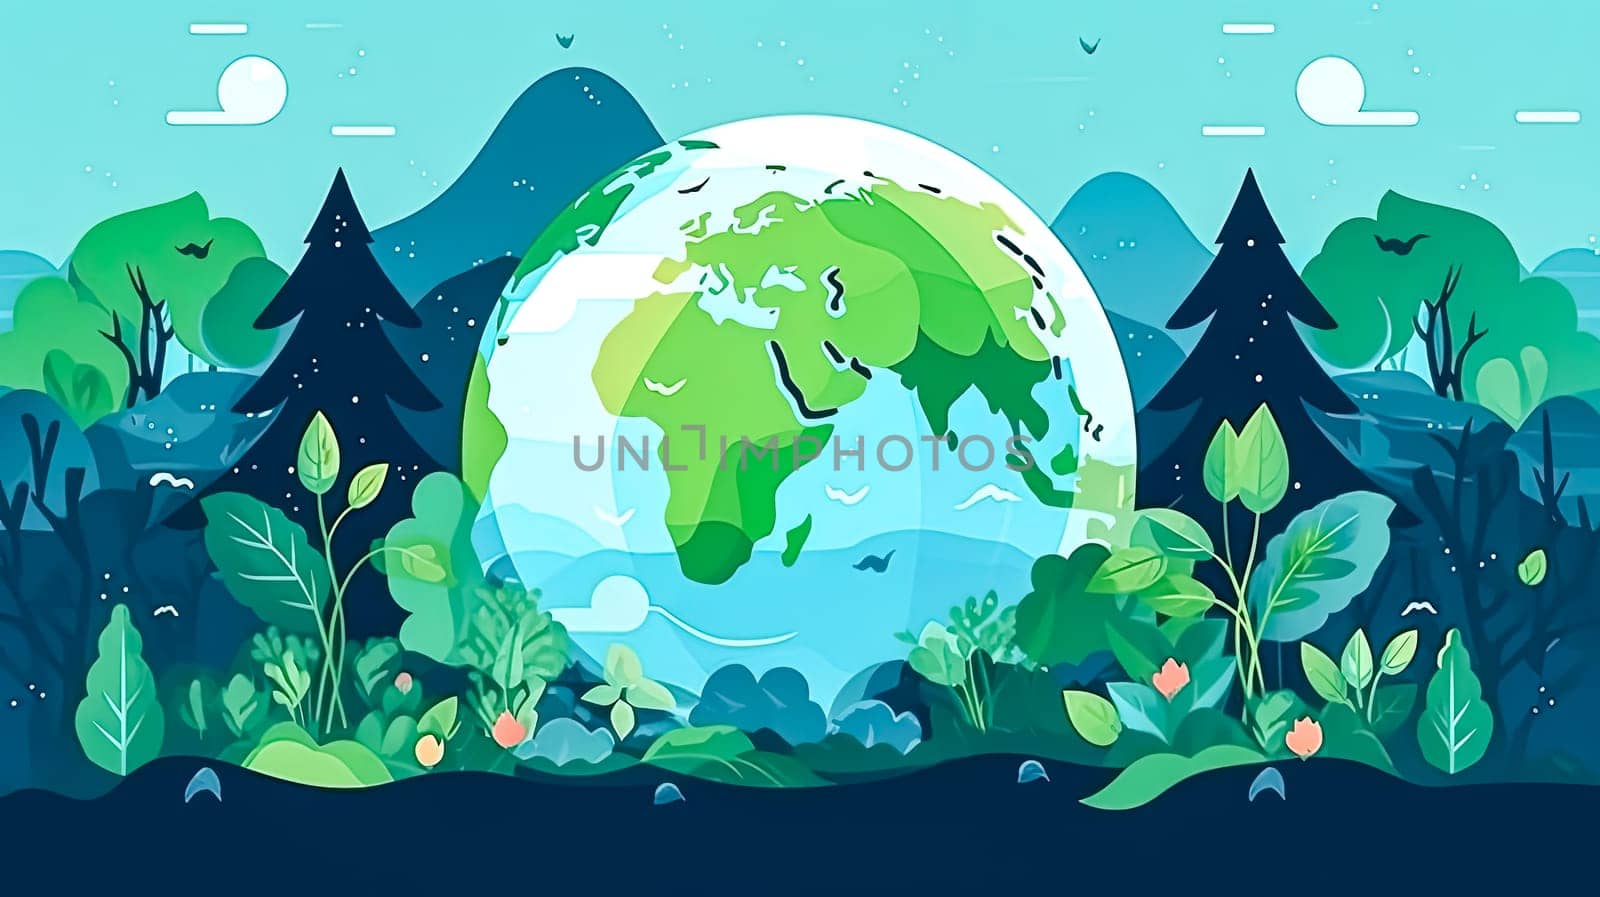 Green mosaic planet, Earth adorned with trees and grass, a vibrant illustration of nature thriving a joyous scene for Earth Day festivities